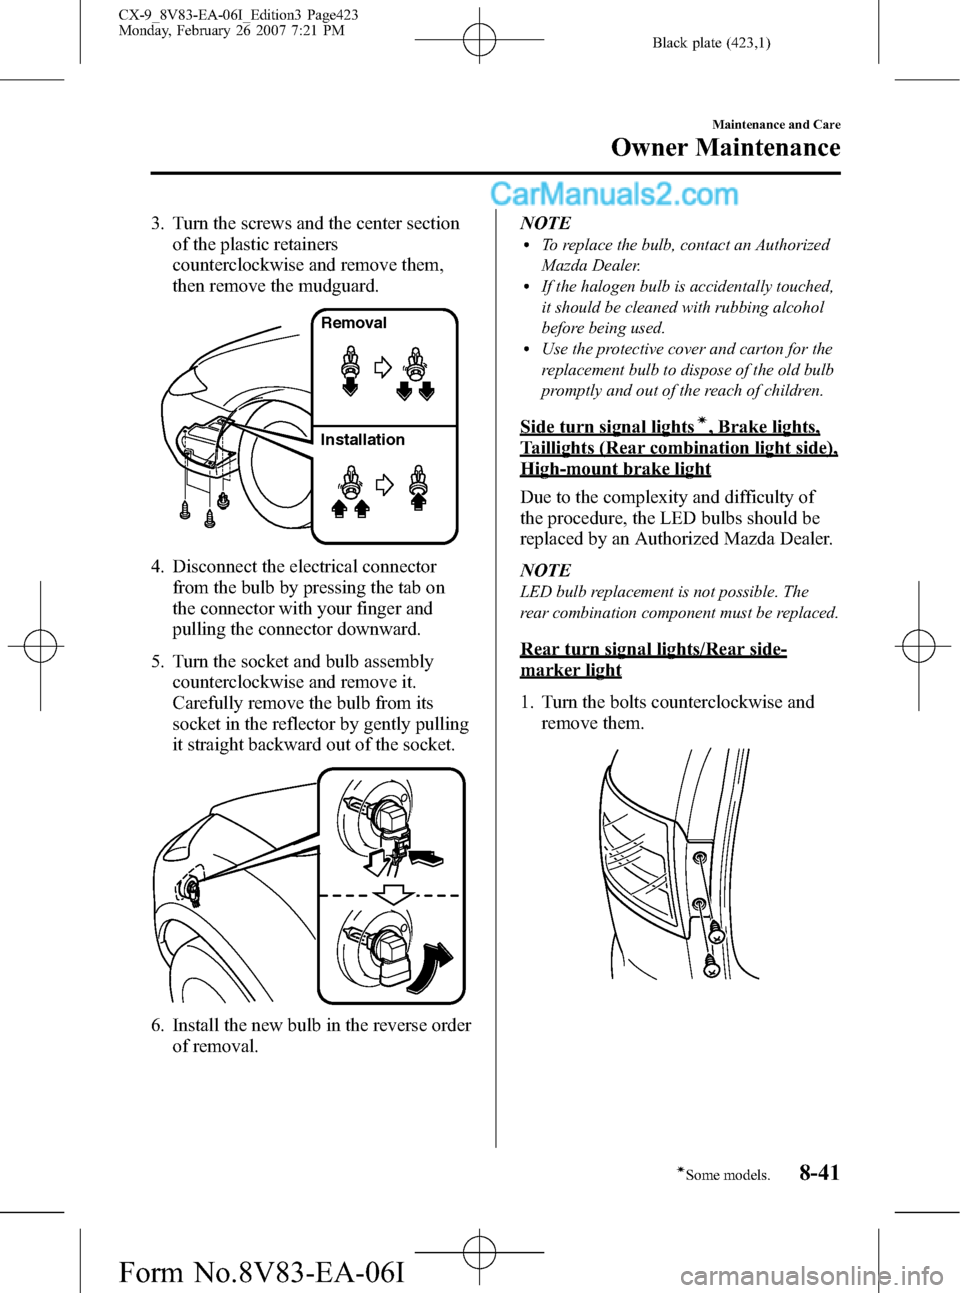 MAZDA MODEL CX-9 2007   (in English) User Guide Black plate (423,1)
3. Turn the screws and the center section
of the plastic retainers
counterclockwise and remove them,
then remove the mudguard.
Removal
Installation
4. Disconnect the electrical con